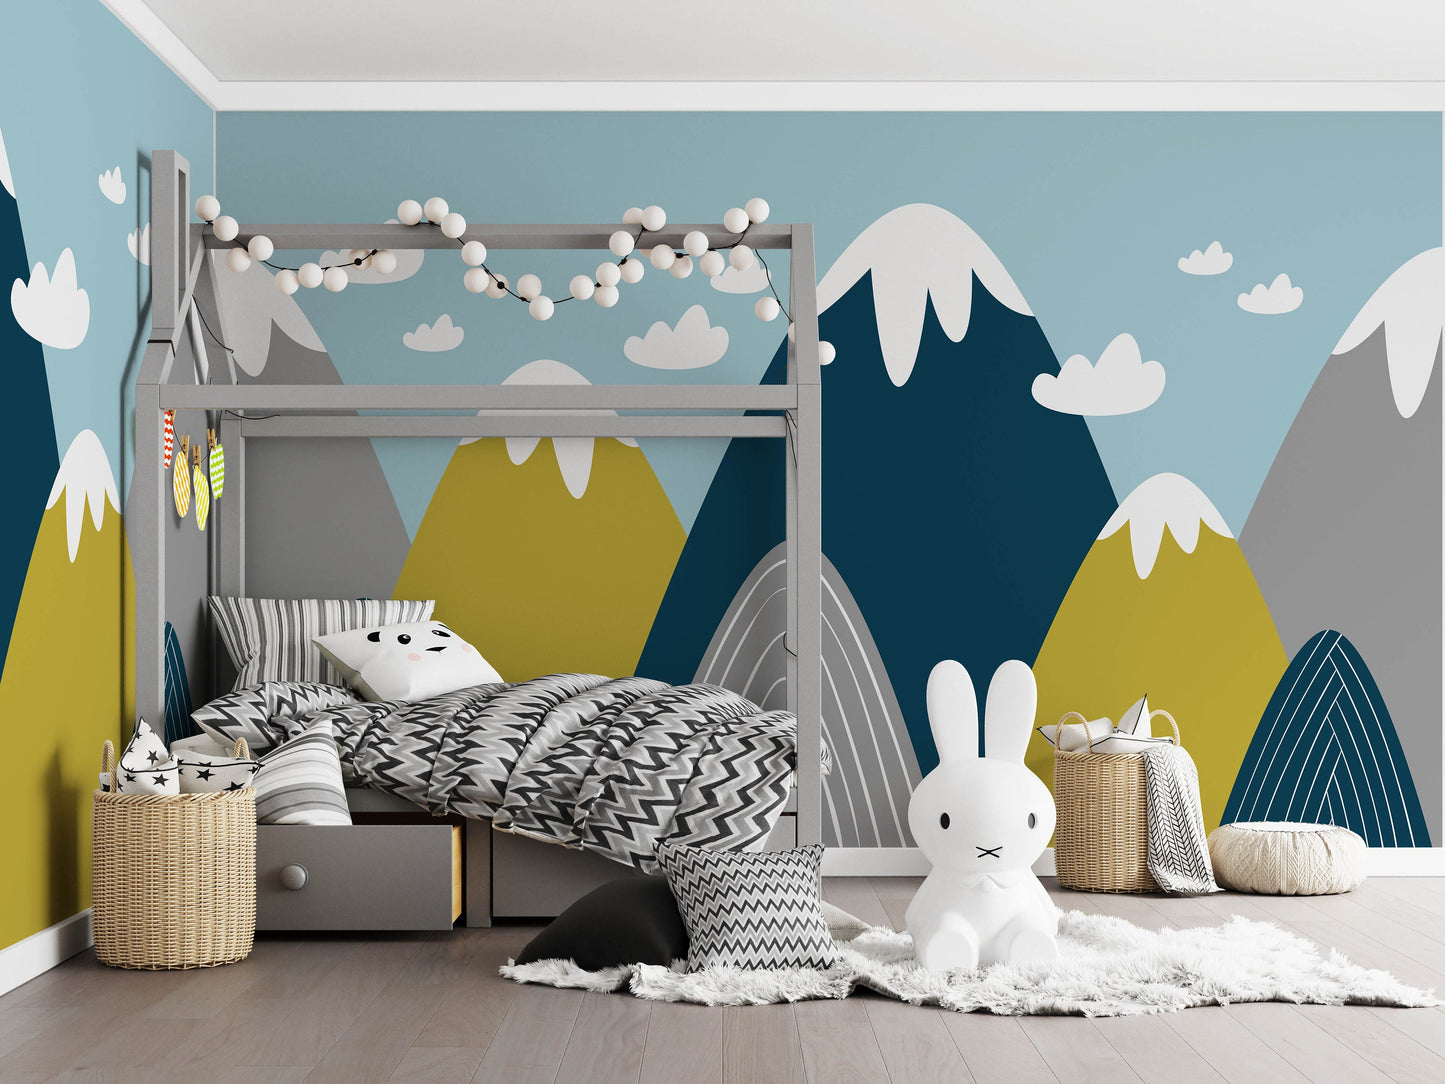 Removable Peel and Stick Wallpaper Mountains Clouds Sky Nursery Wall Paper Wall Murals, KL0044